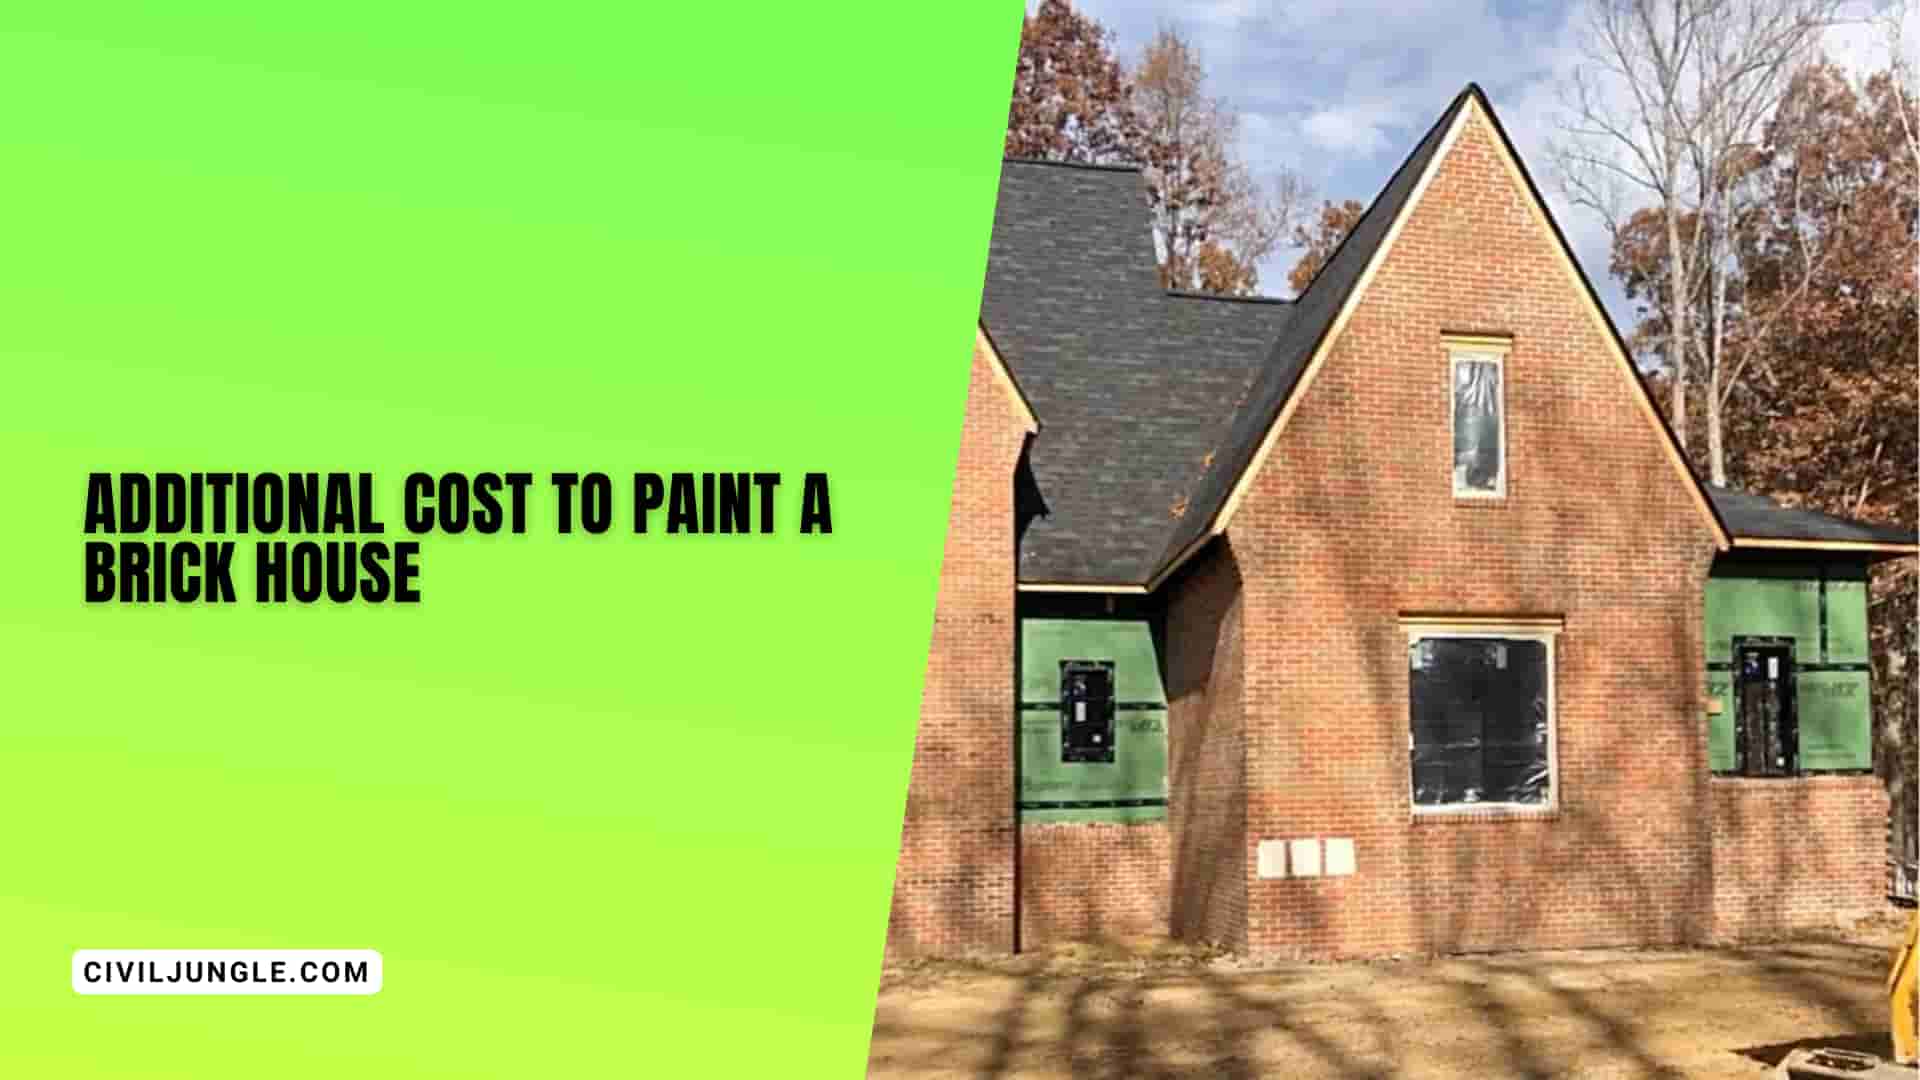 Additional Cost to Paint a Brick House